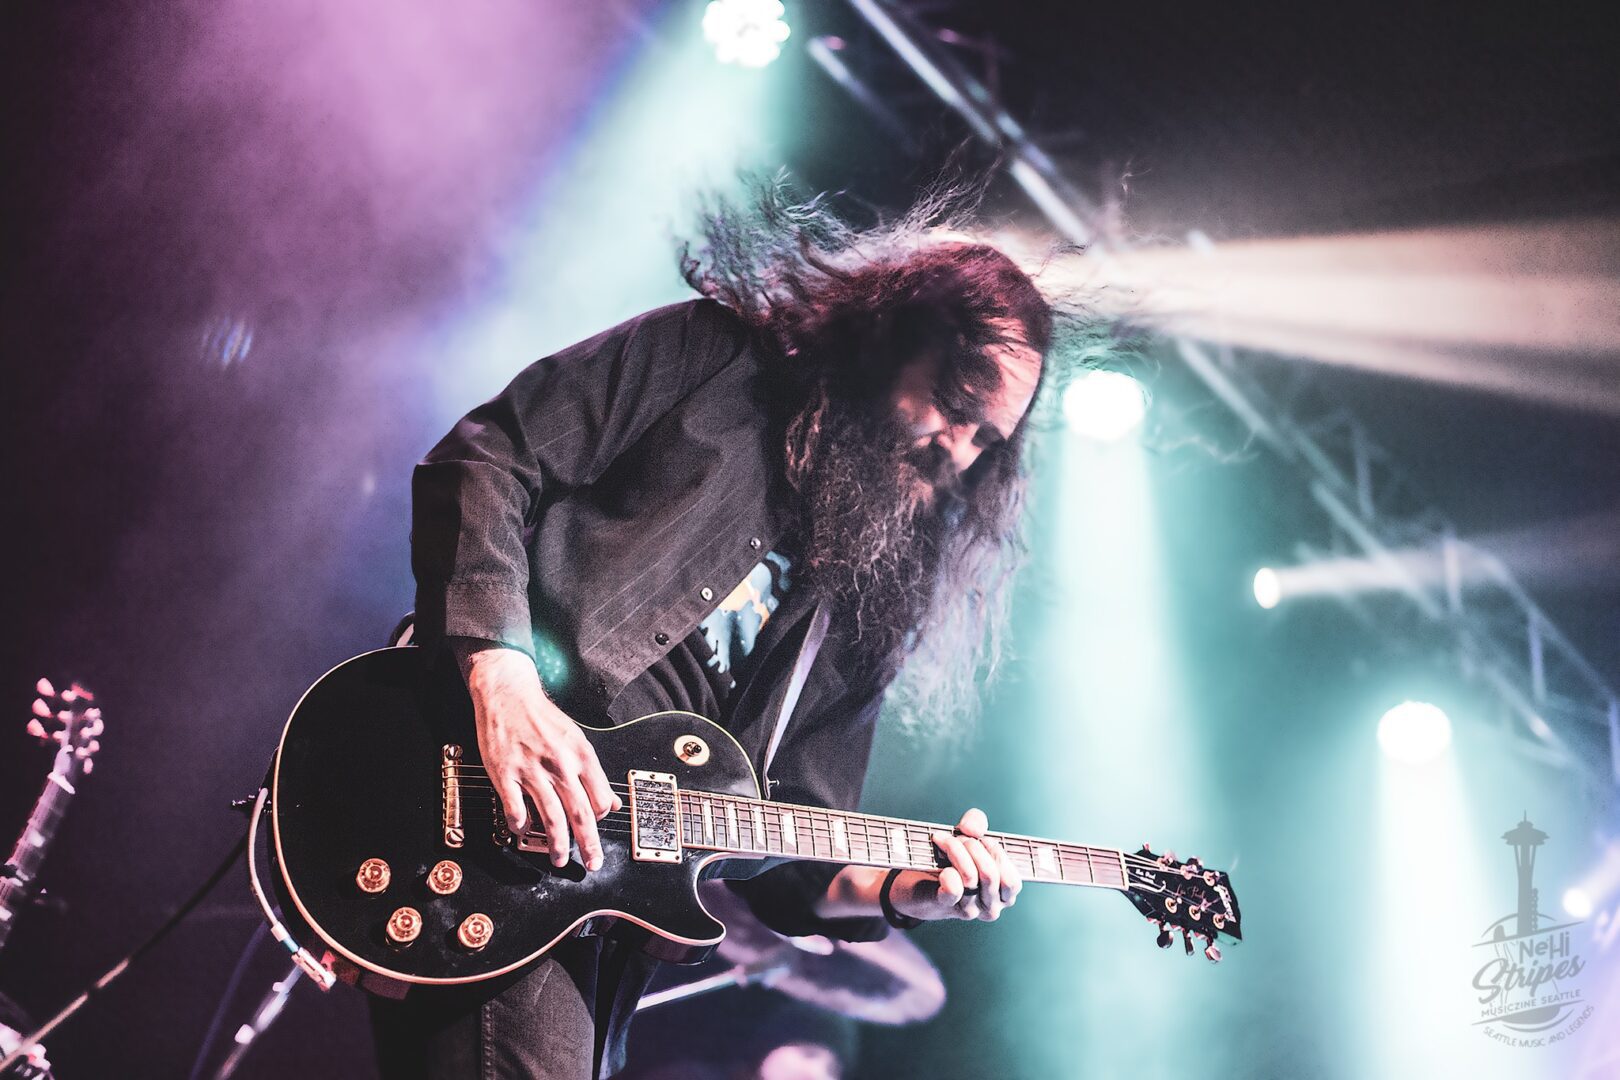 A man with long hair and beard playing guitar.